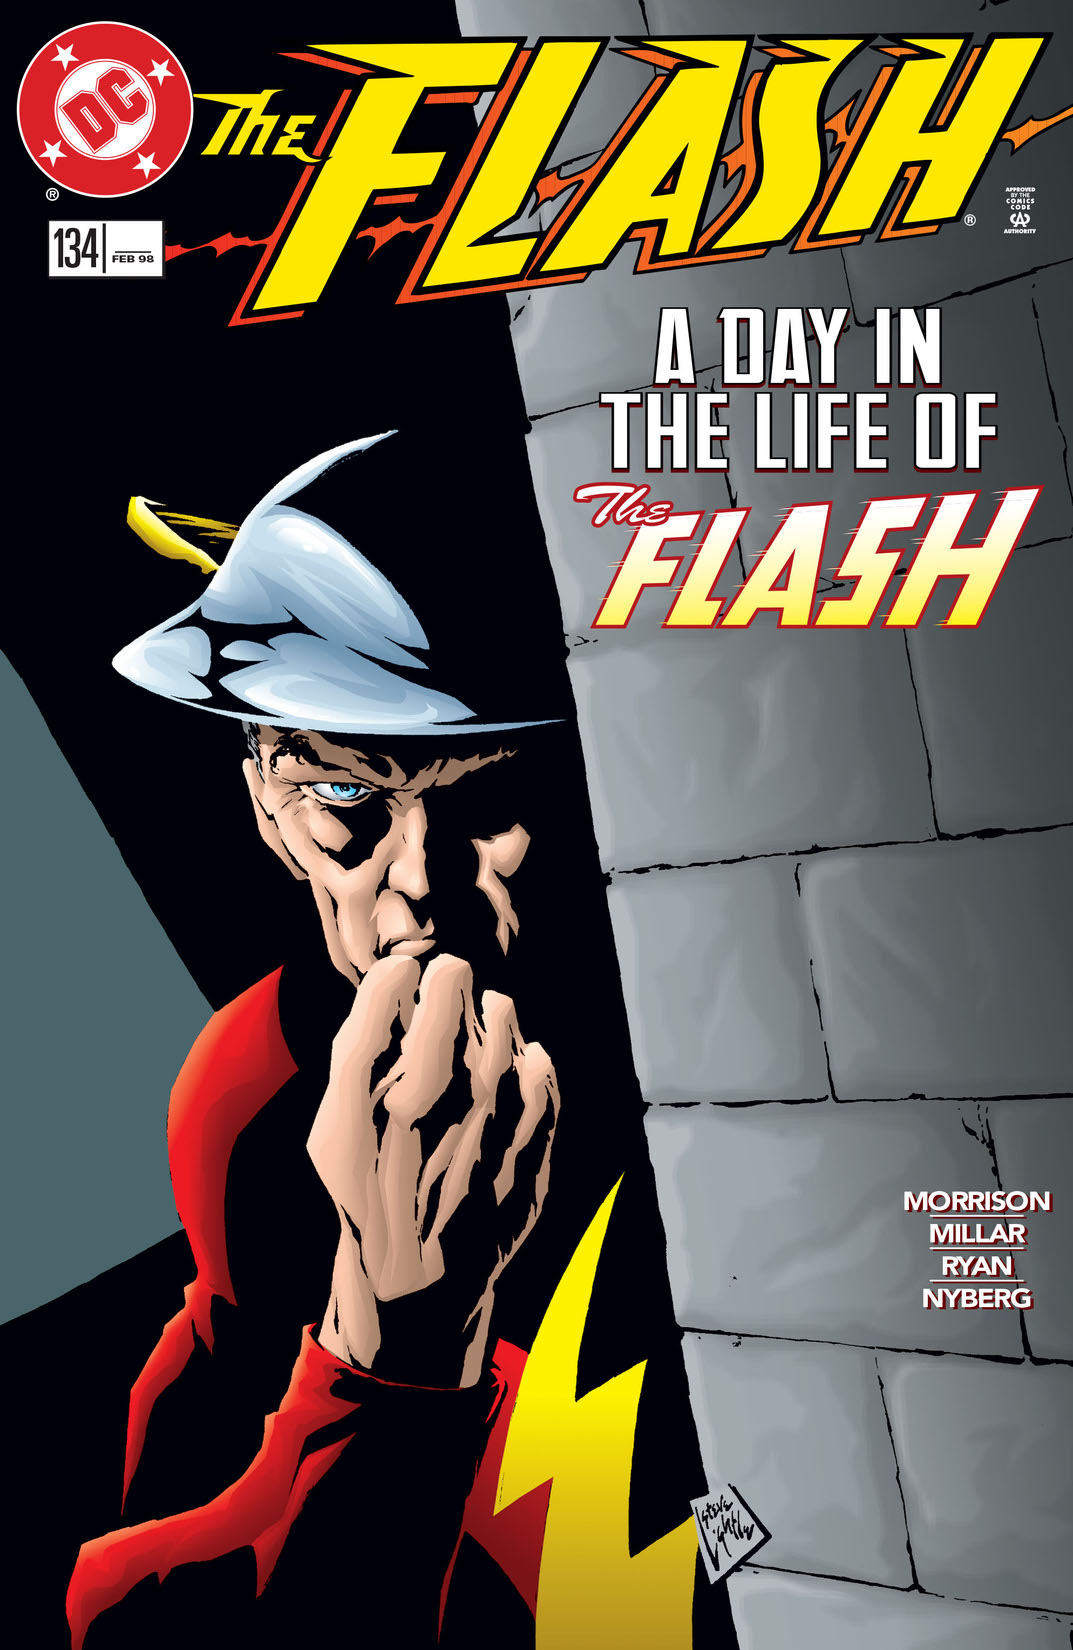 The Flash (1987-) #134 preview images